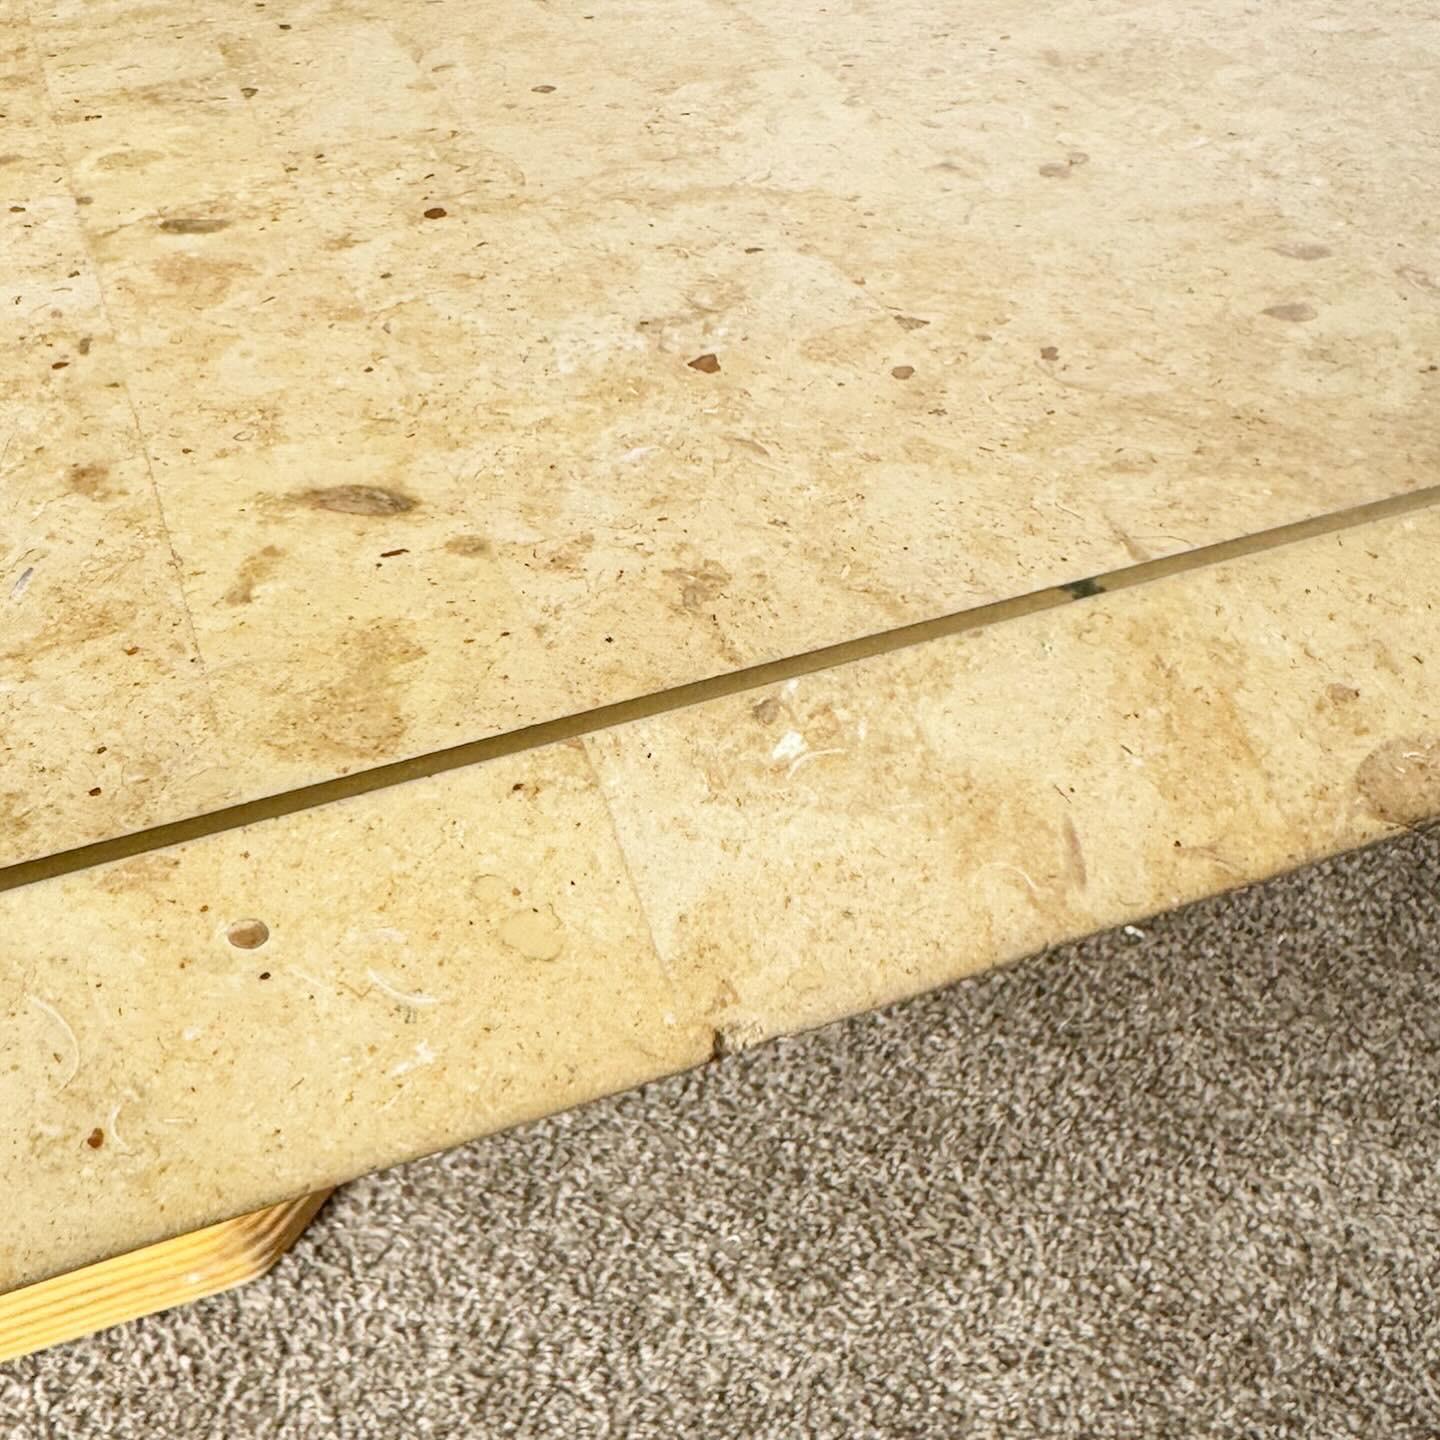 tessellated stone dining table